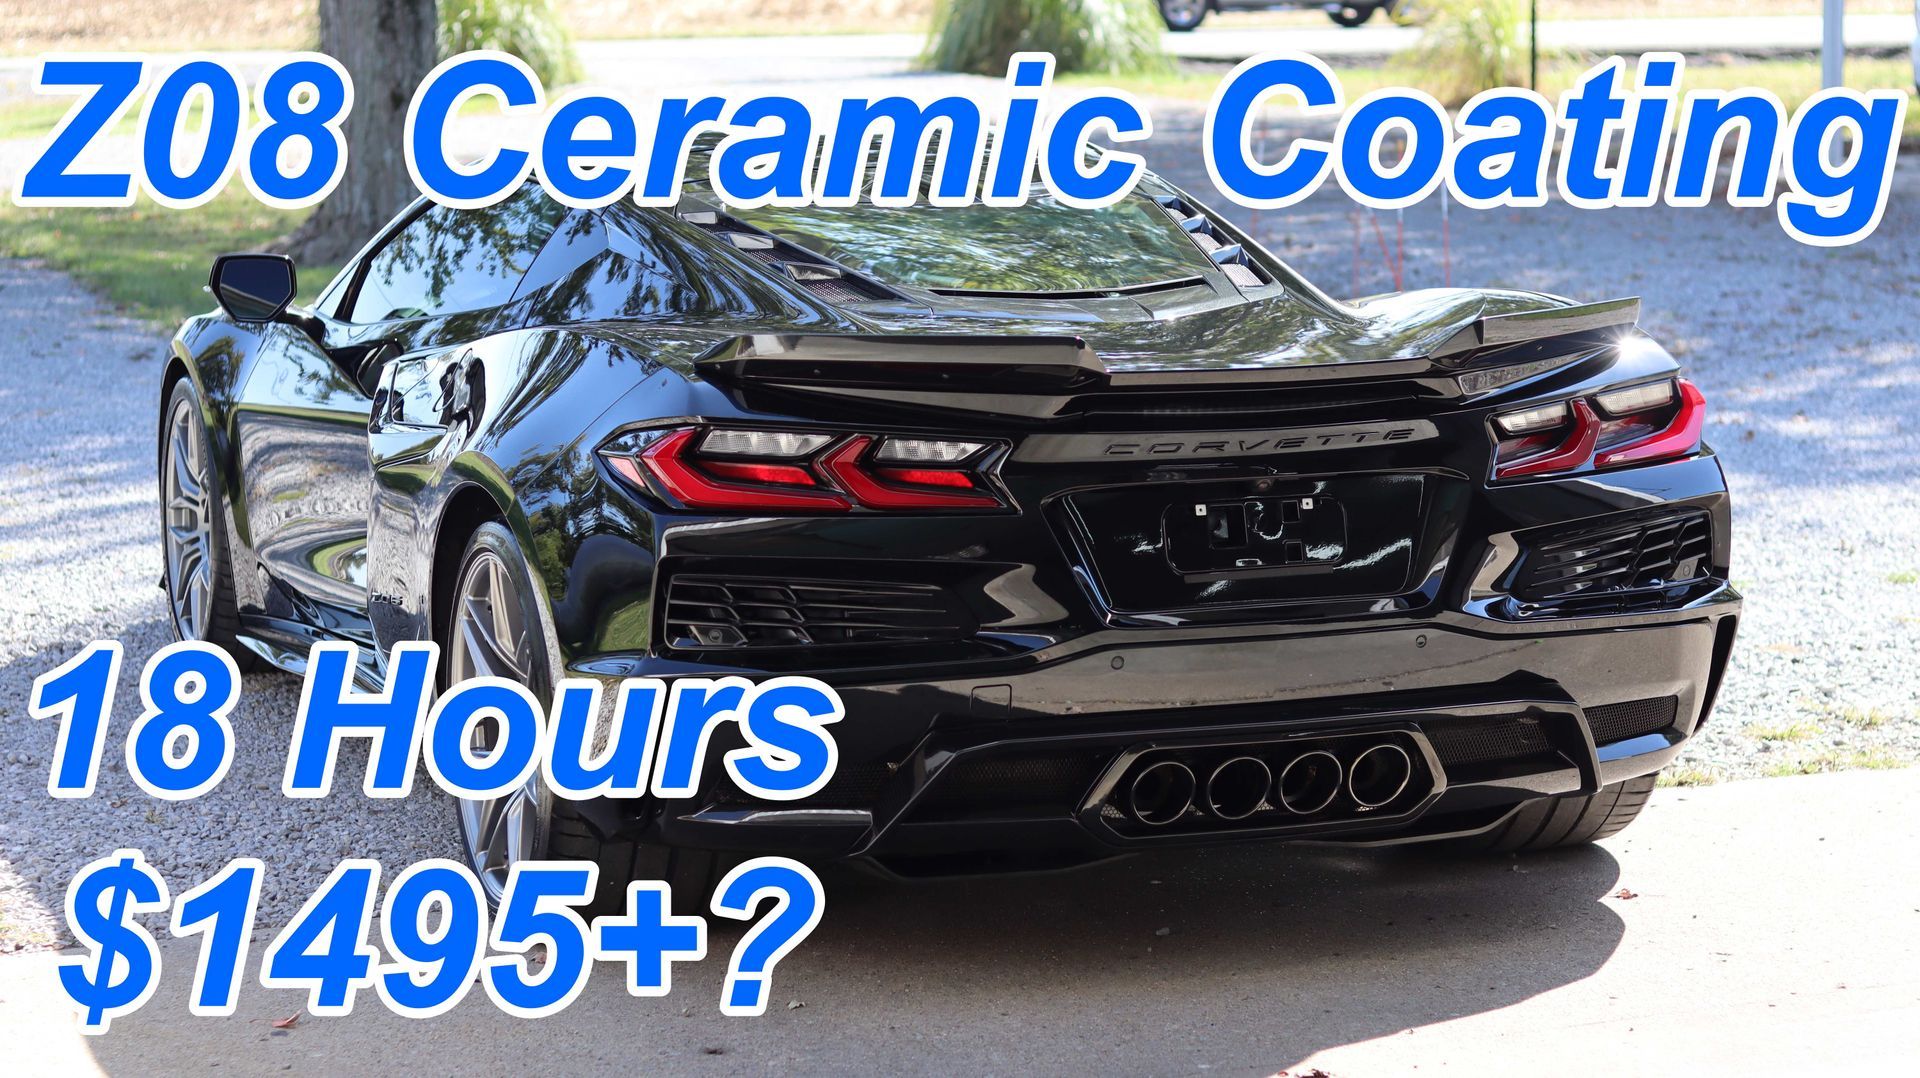 Ceramic Coating Specialists of Southern Illinois